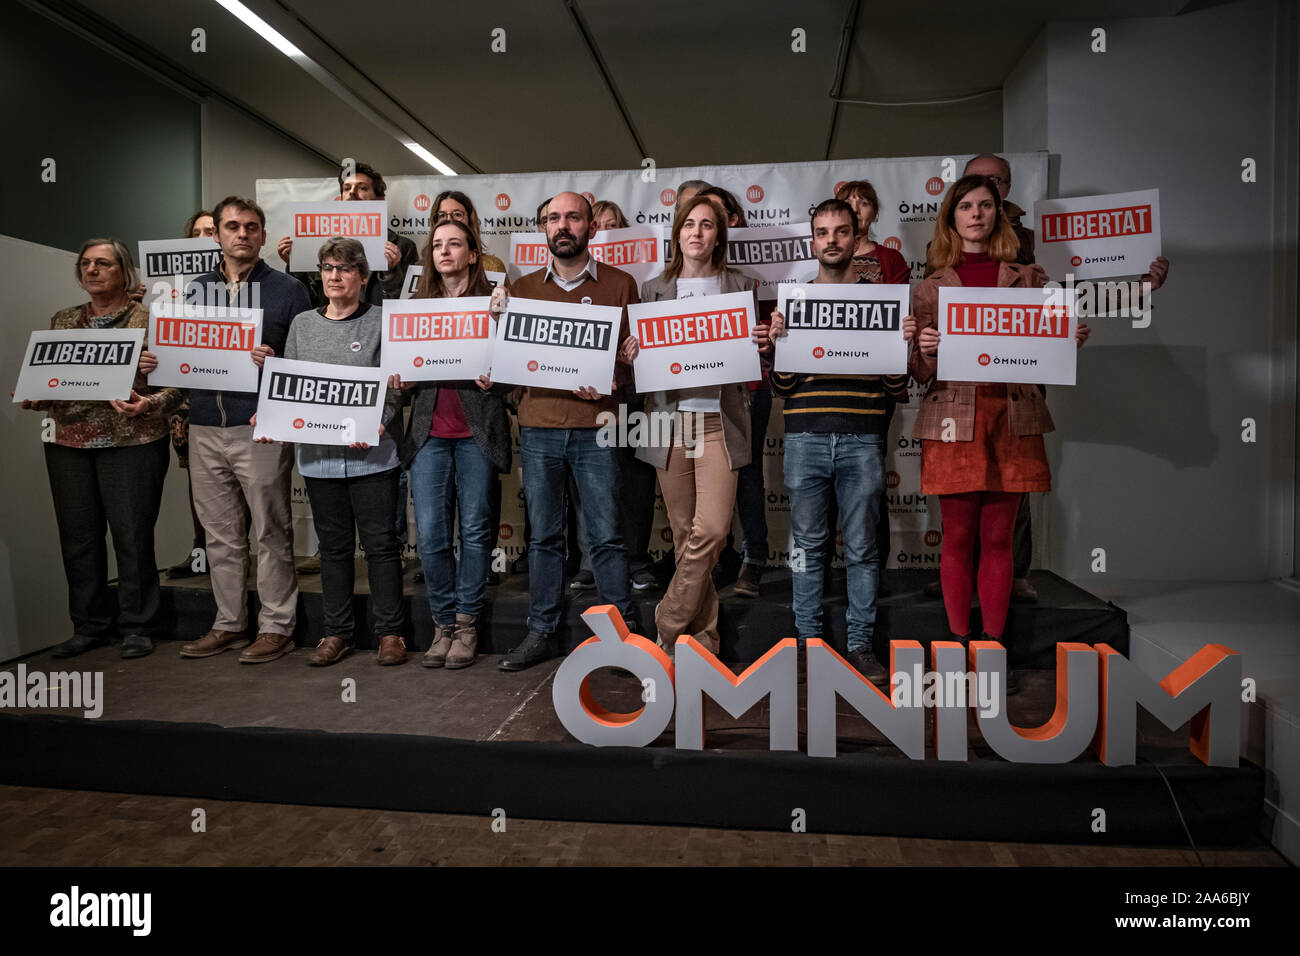 Members of the National Board of Òmnium Cultural holding placards during a press conference. After Amnesty International's public statement about the unfair prison situation of Catalan political prisoners Jordi Cuixart and Jordi Sànchez, the National Board of Òmnium Cultural, of which Jordi Cuixart is president, has made an institutional declaration demanding immediate release of the prisoners and the annulment of the sentence. Stock Photo